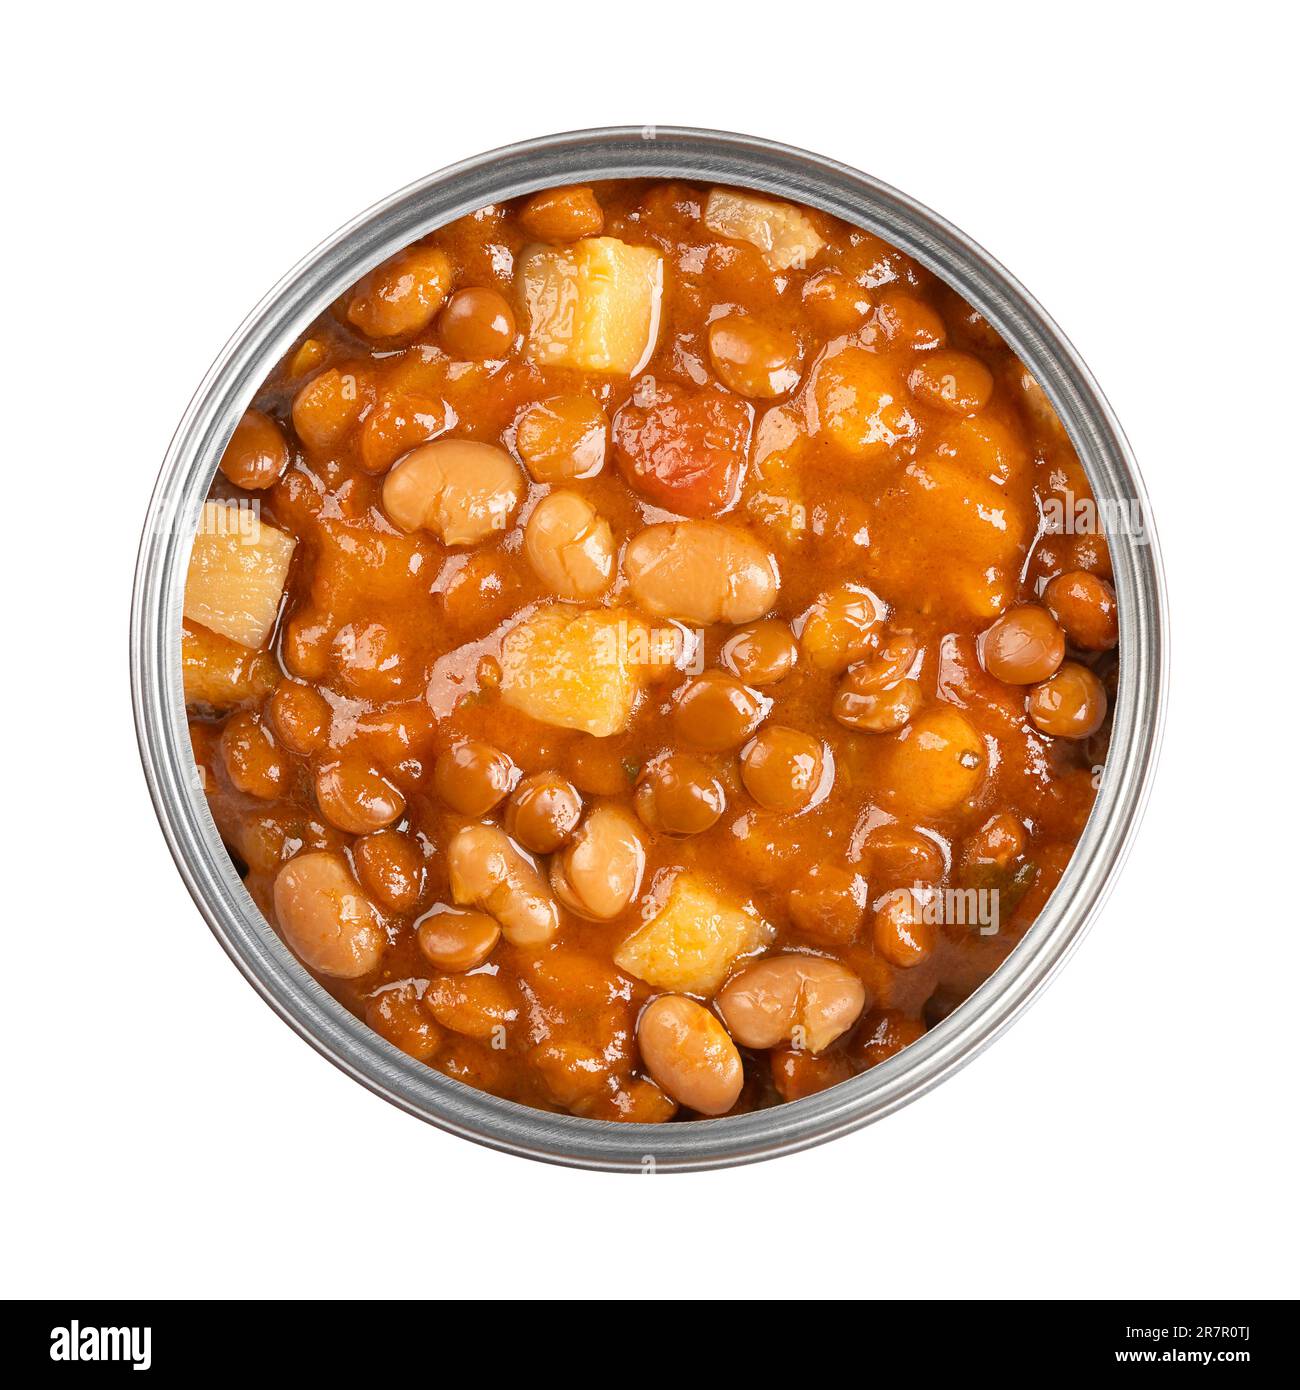 Lentil and bean stew, in an opened can. French stew of brown lentils, white beans, potatoes, tomatoes, onions and herbs, cooked in liquid. Stock Photo